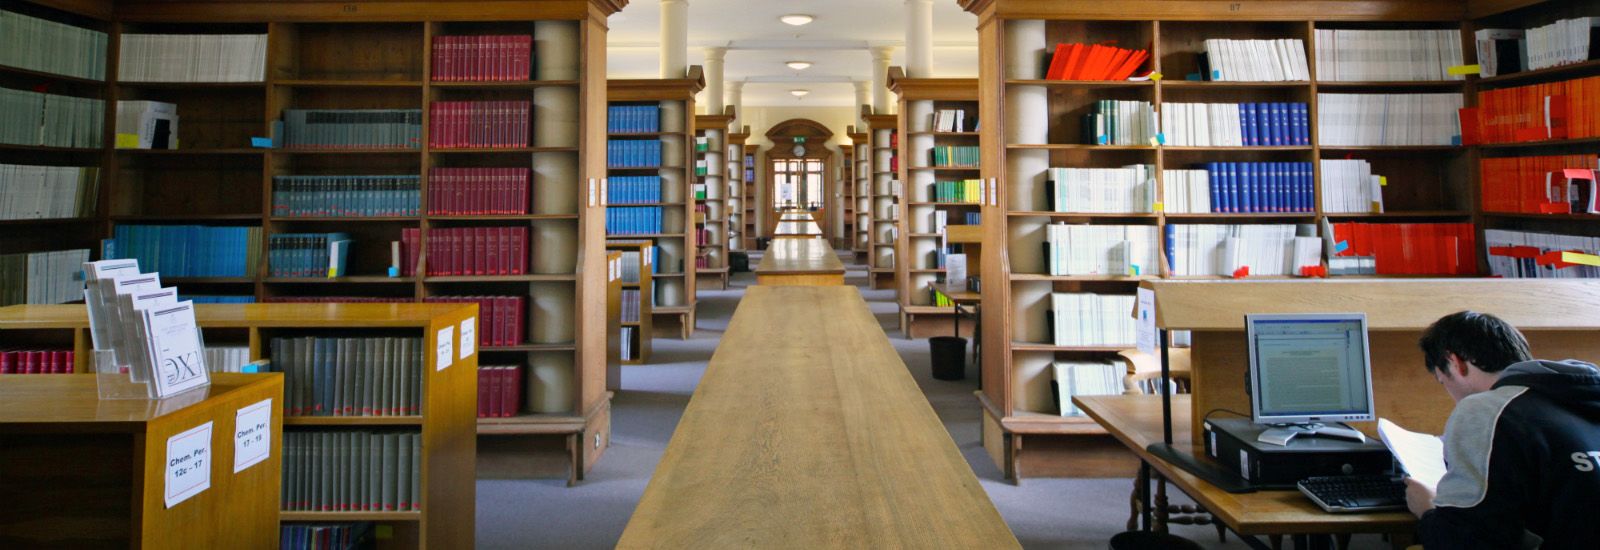 Bookcases and a student working in a library